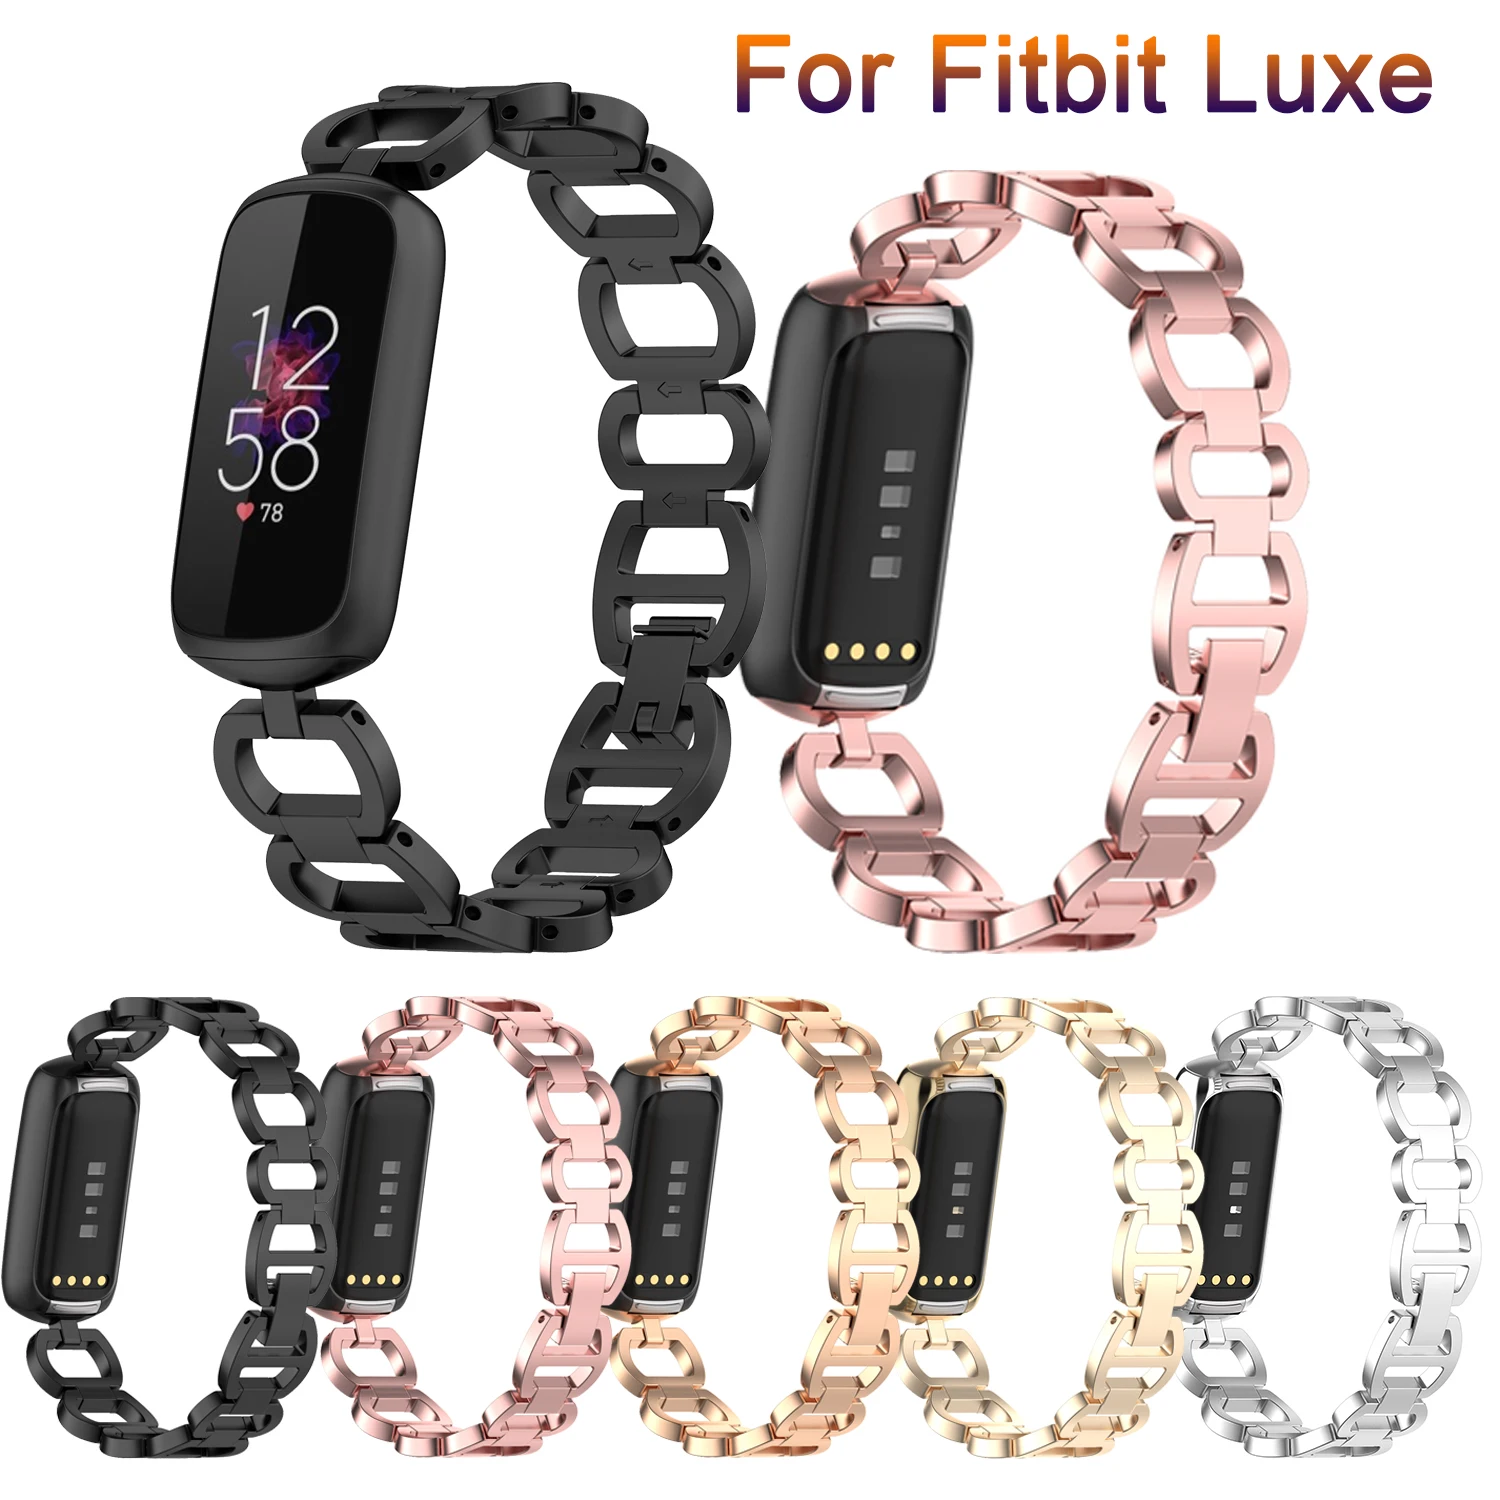 New Watch Bands For Fitbit Luxe sport watch Band Stainless Steel Metal Wrist Strap Women Jewelry Bracelet For Fitbit Luxe bands